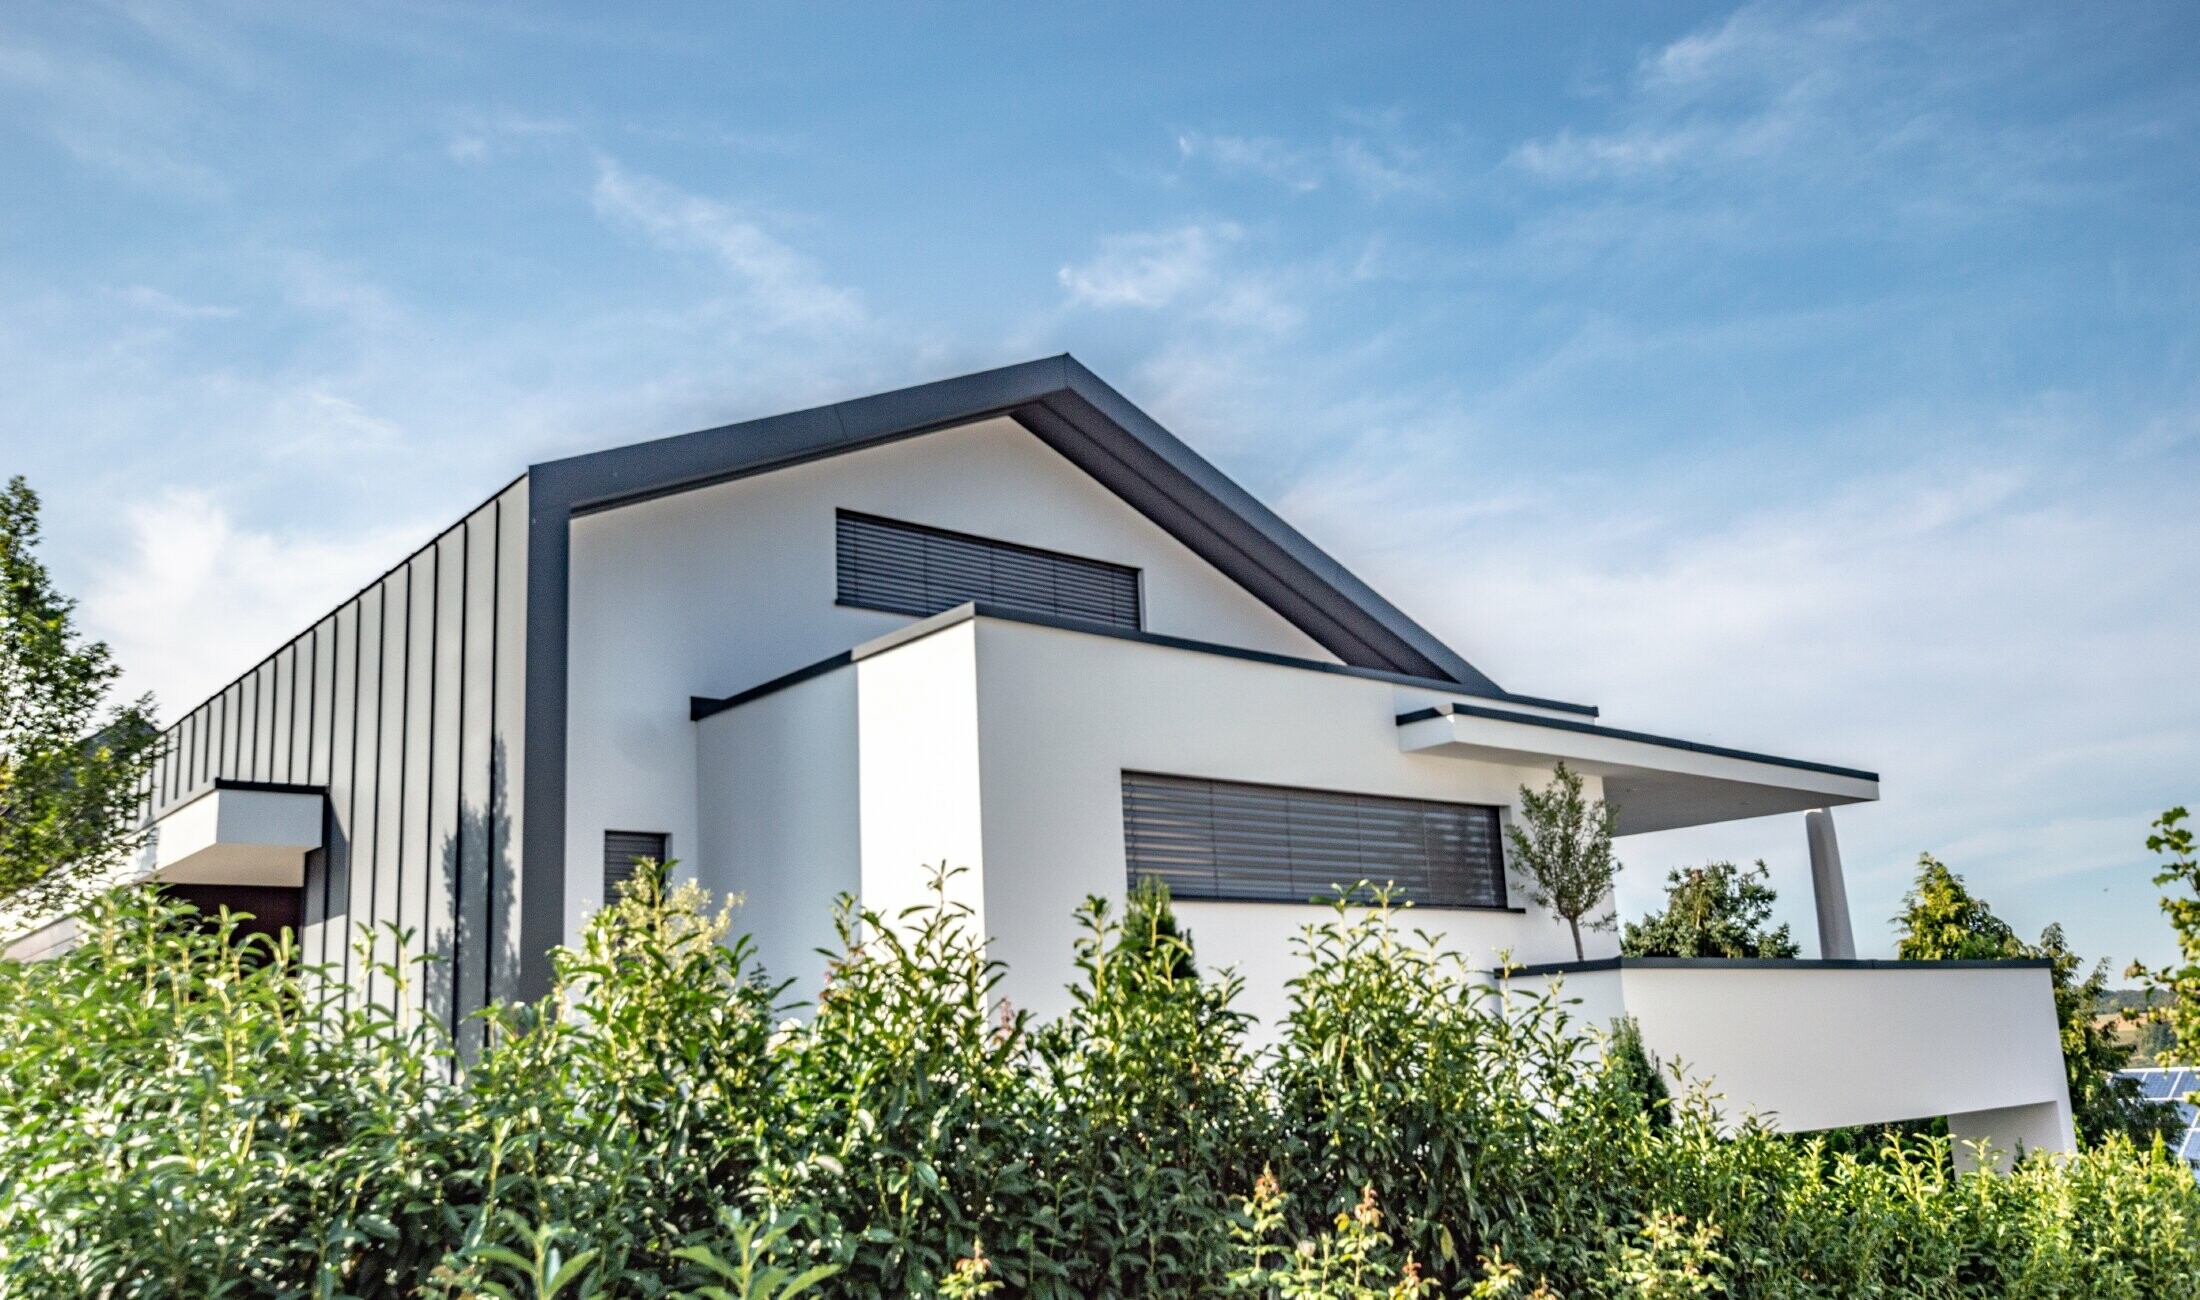 Modern detached house in which the roof cladding also extends over the façade as standing seam cladding. The colour used for the PREFA material is anthracite.